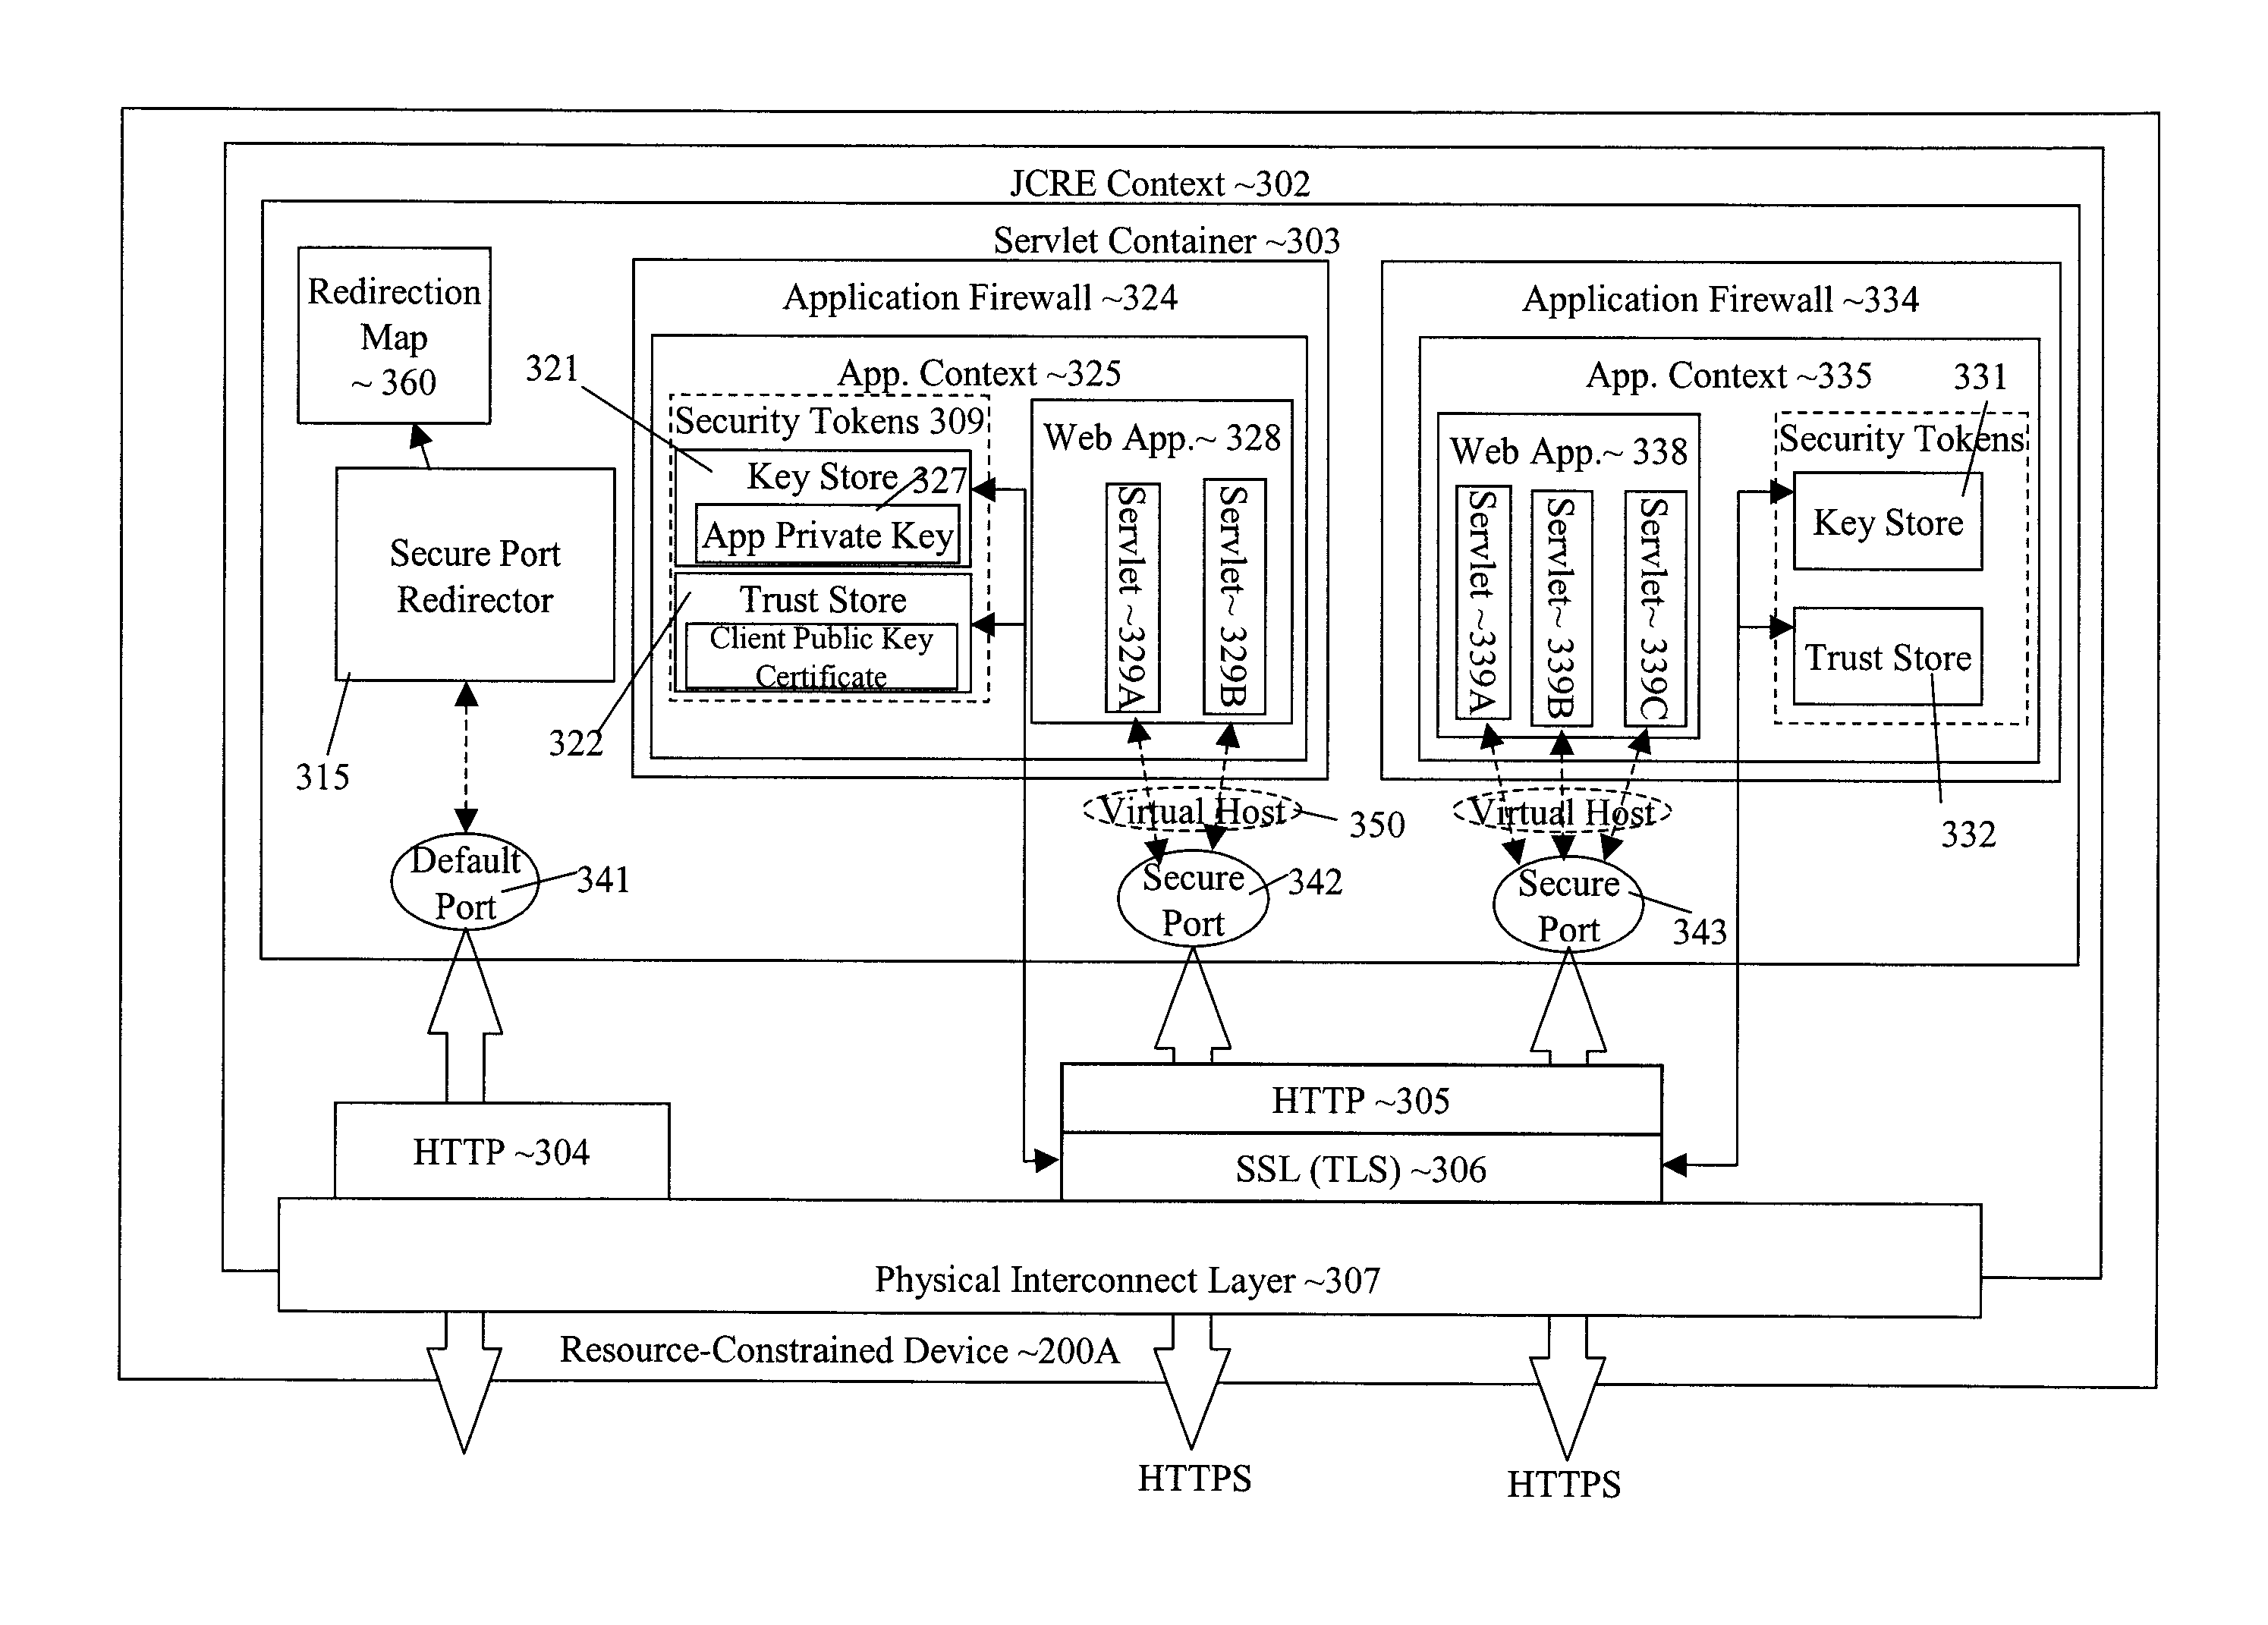 Transport-level web application security on a resource-constrained device